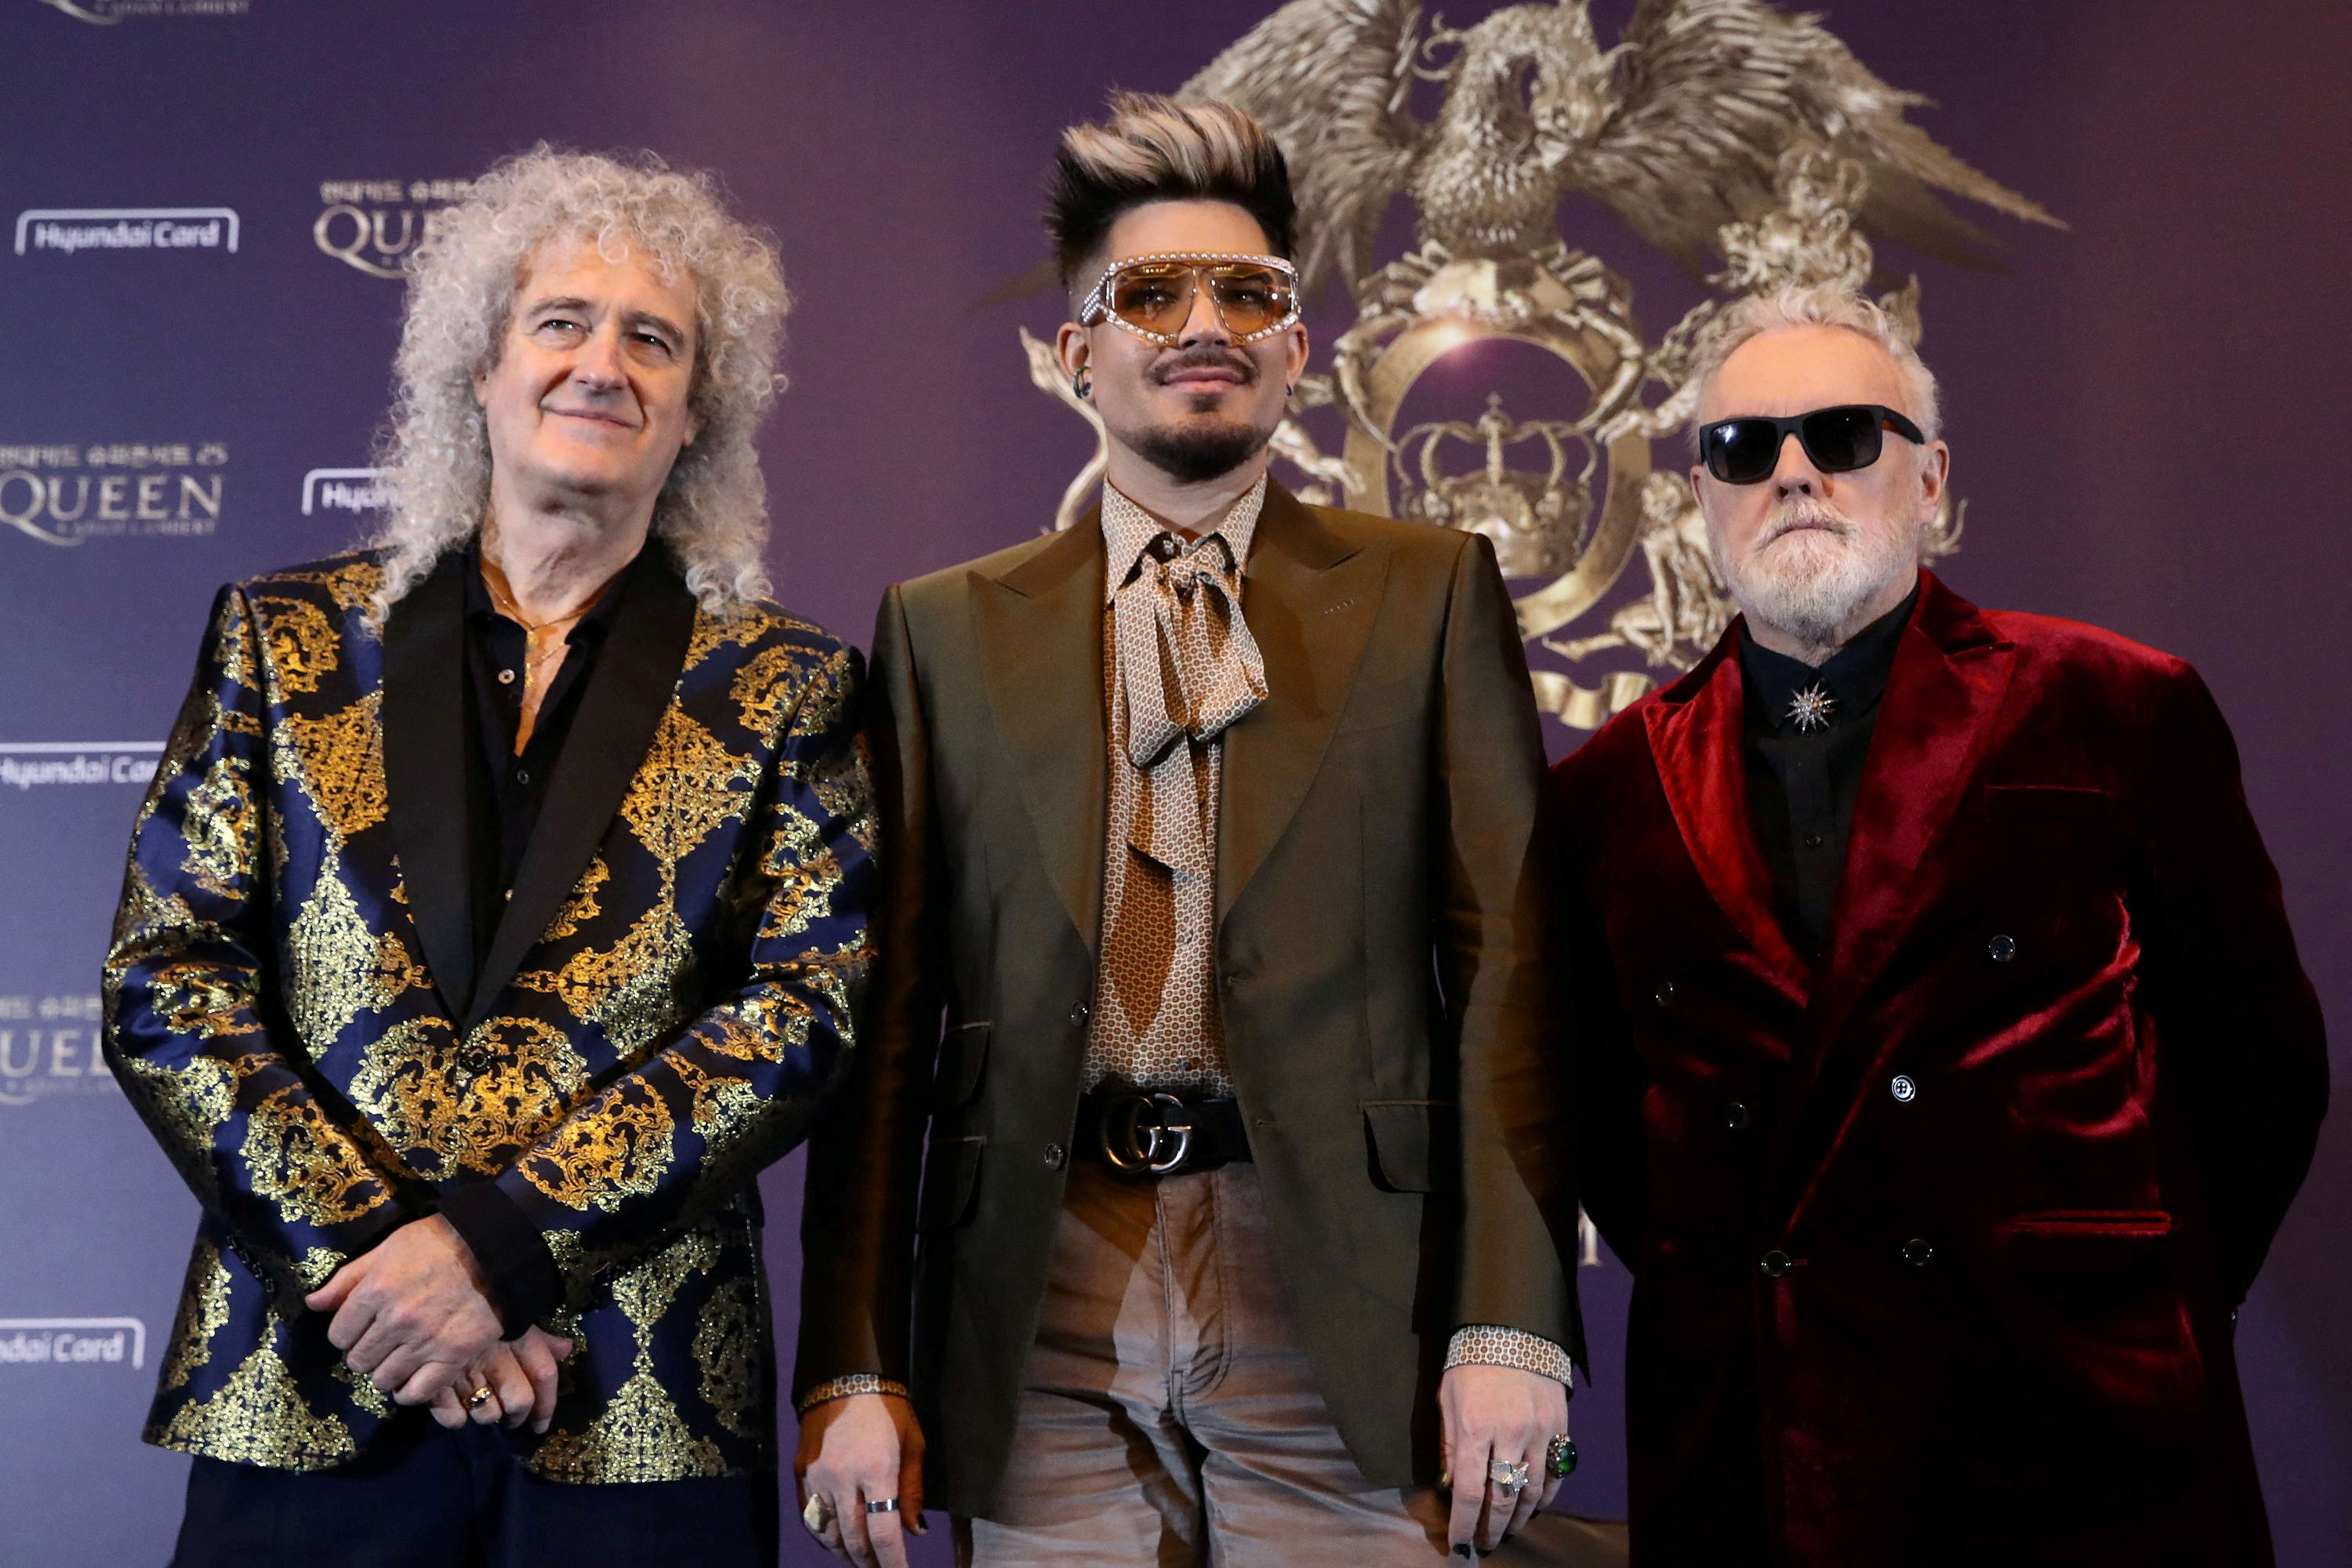 Brian May, Adam Lambert and Roger Taylor of Queen attend the news conference ahead of the Rhapsody Tour at Conrad Hotel in Seoul, South Korea